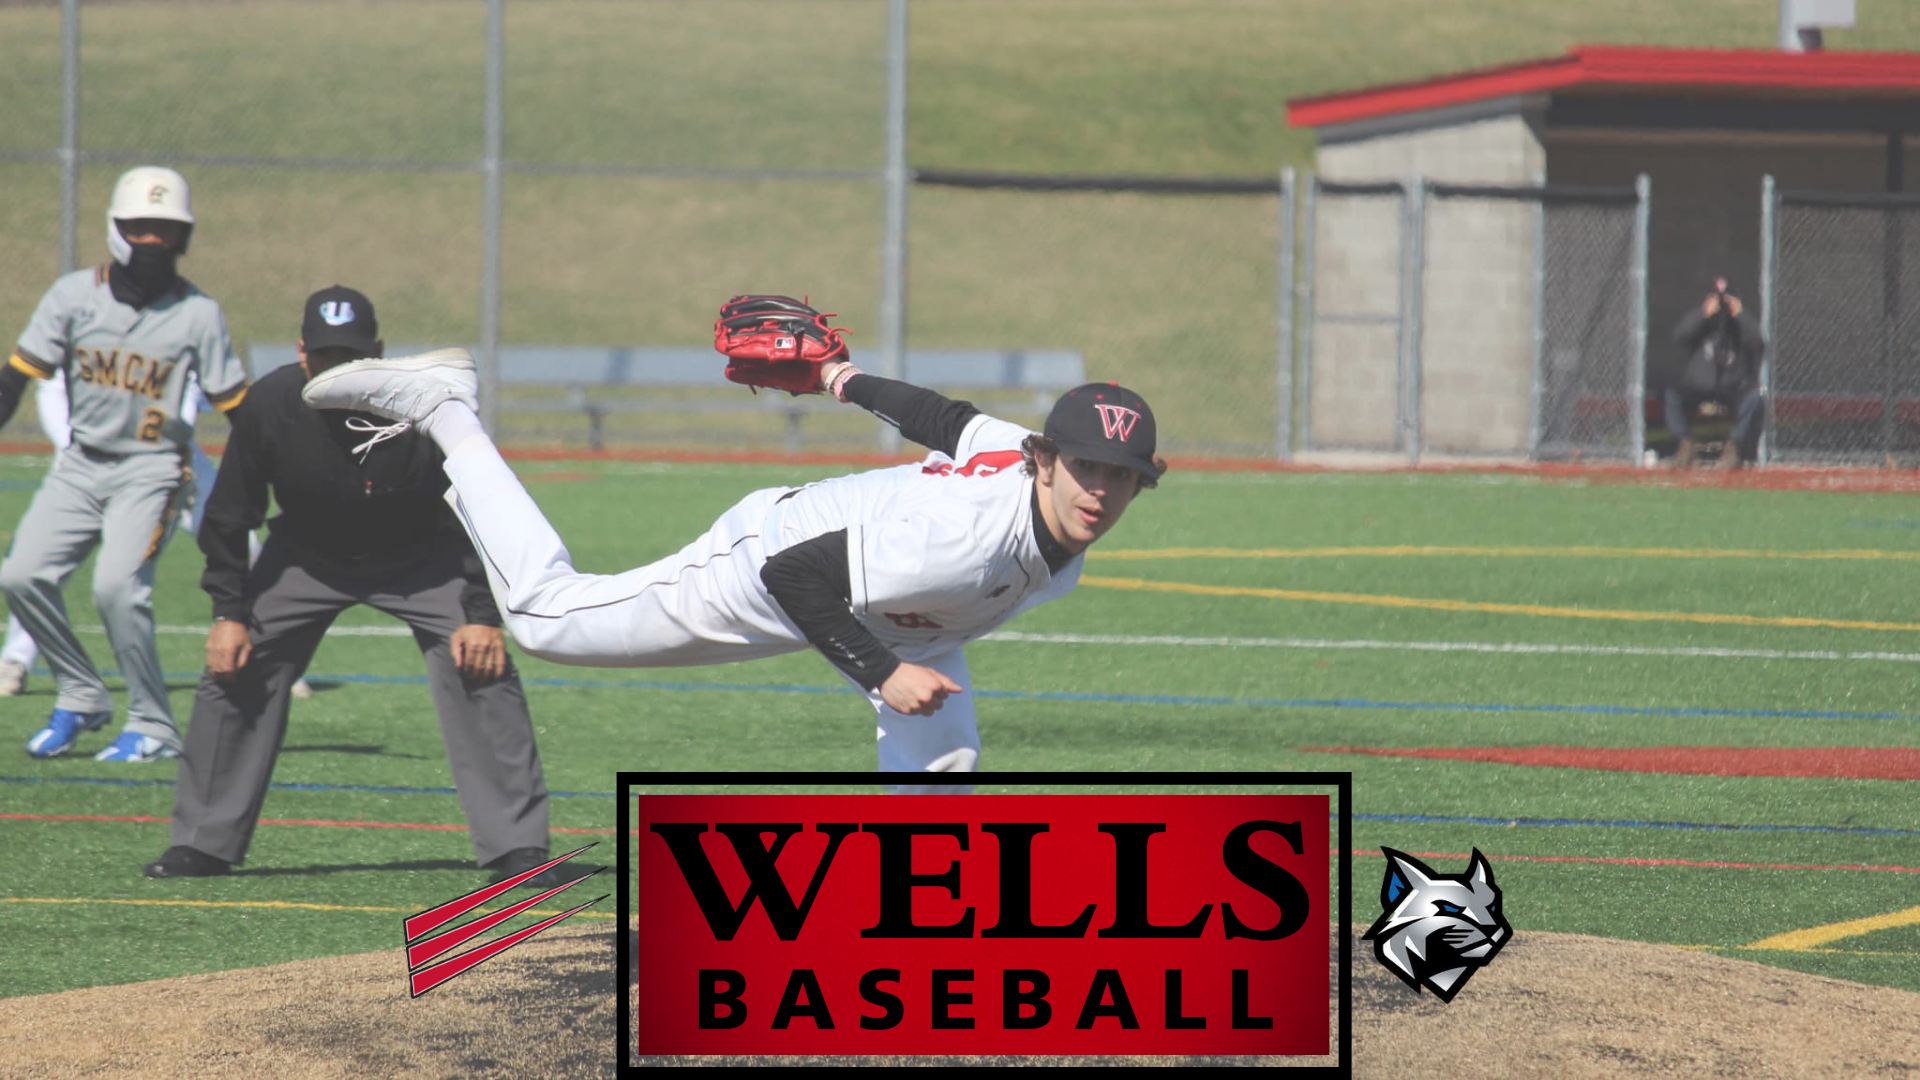 Wells Hosts Penn college for 3 game series